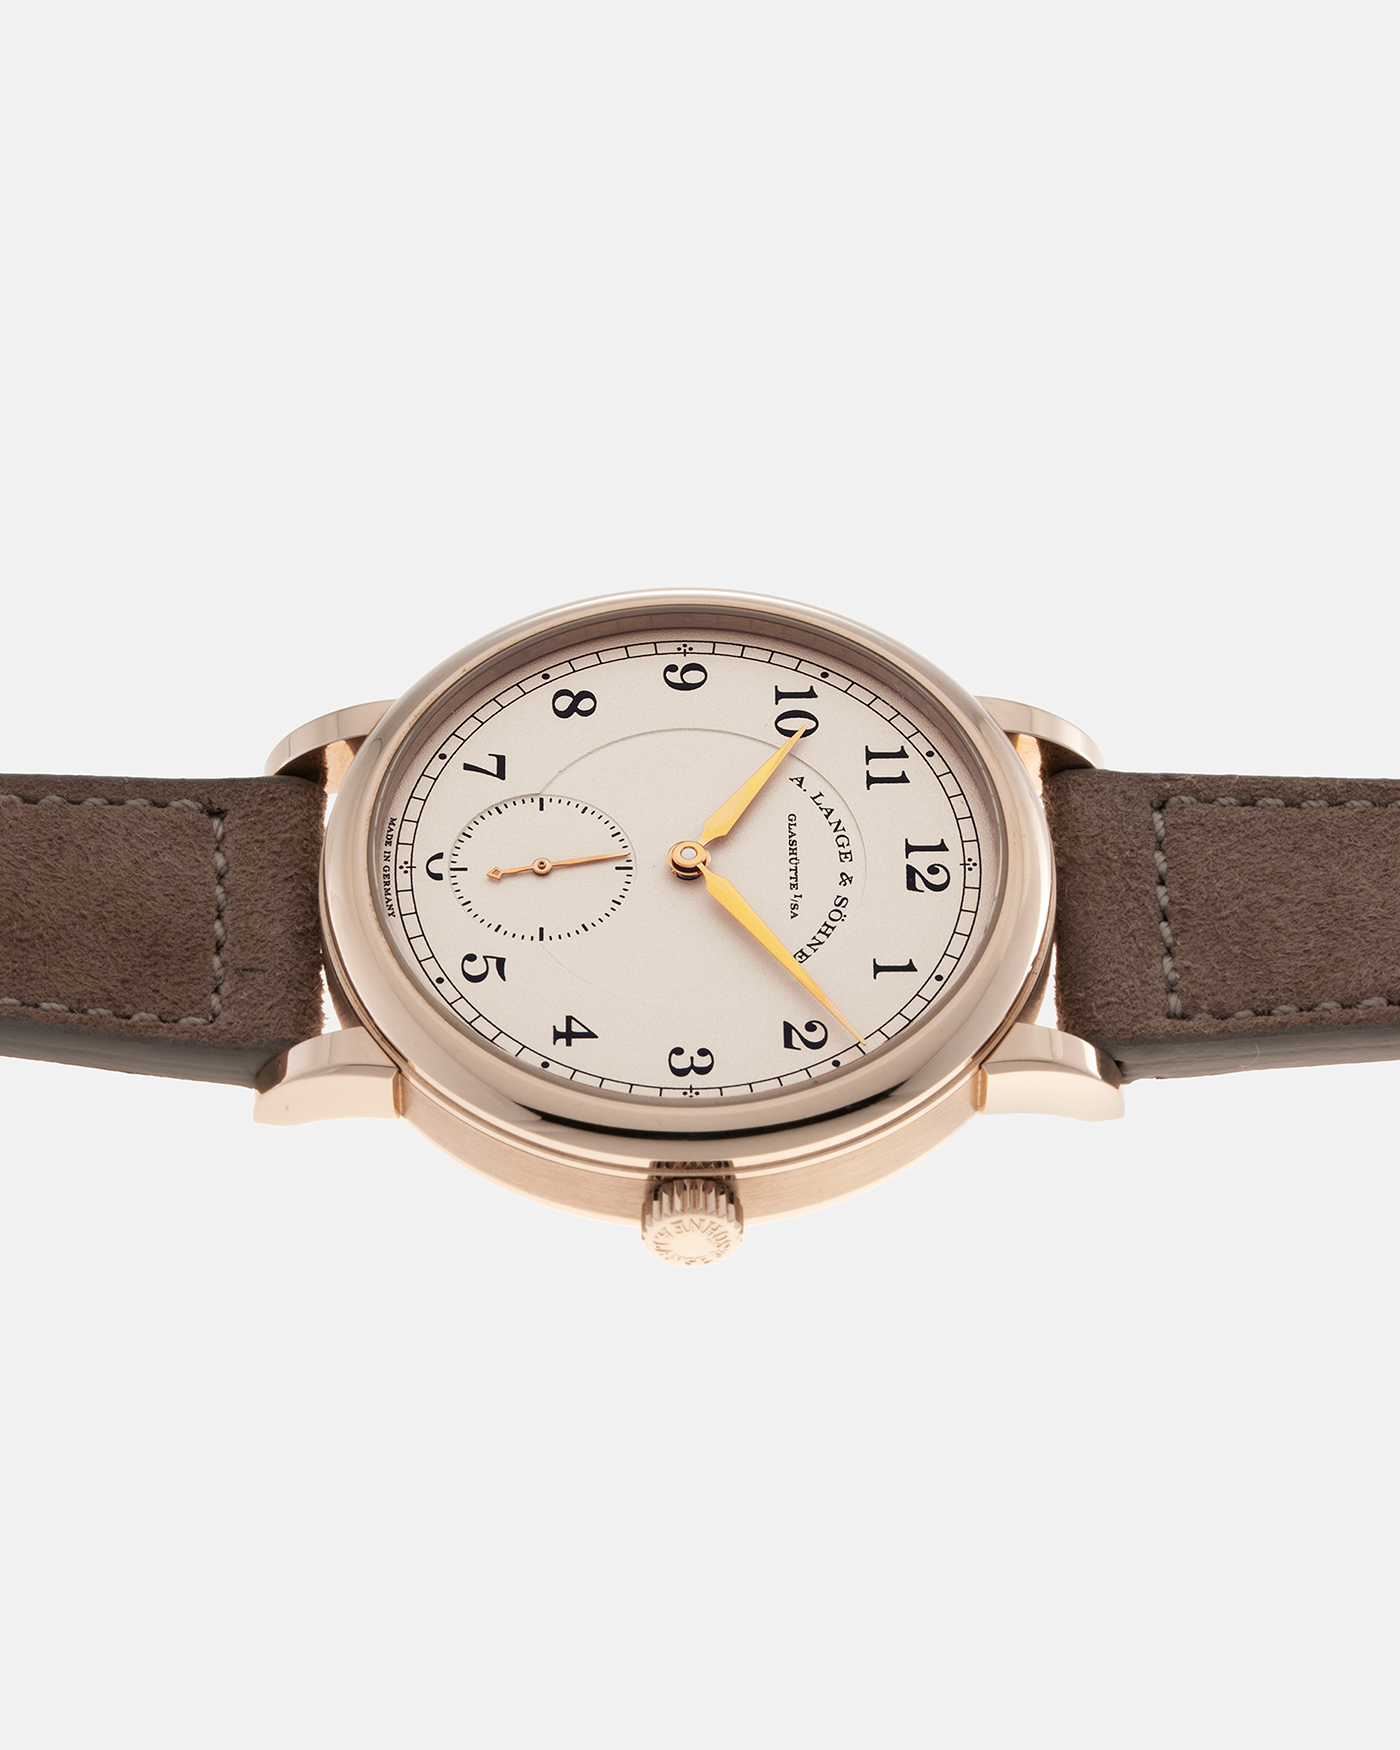 Brand: A. Lange & Söhne Year: 2015 Model: 1815 200th Anniversary F. A. Lange, Limited Edition of 200 pieces Ref Number: 236.050 Material: Honey Gold Movement: A. Lange & Söhne Cal. L051.1, Manual-Winding Case Diameter: 40m Lug Width: 20mm Strap: Molequin Taupe Suede Strap with Signed Honey Gold Tang Buckle, additional A. Lange & Söhne Black Alligator Leather Strap